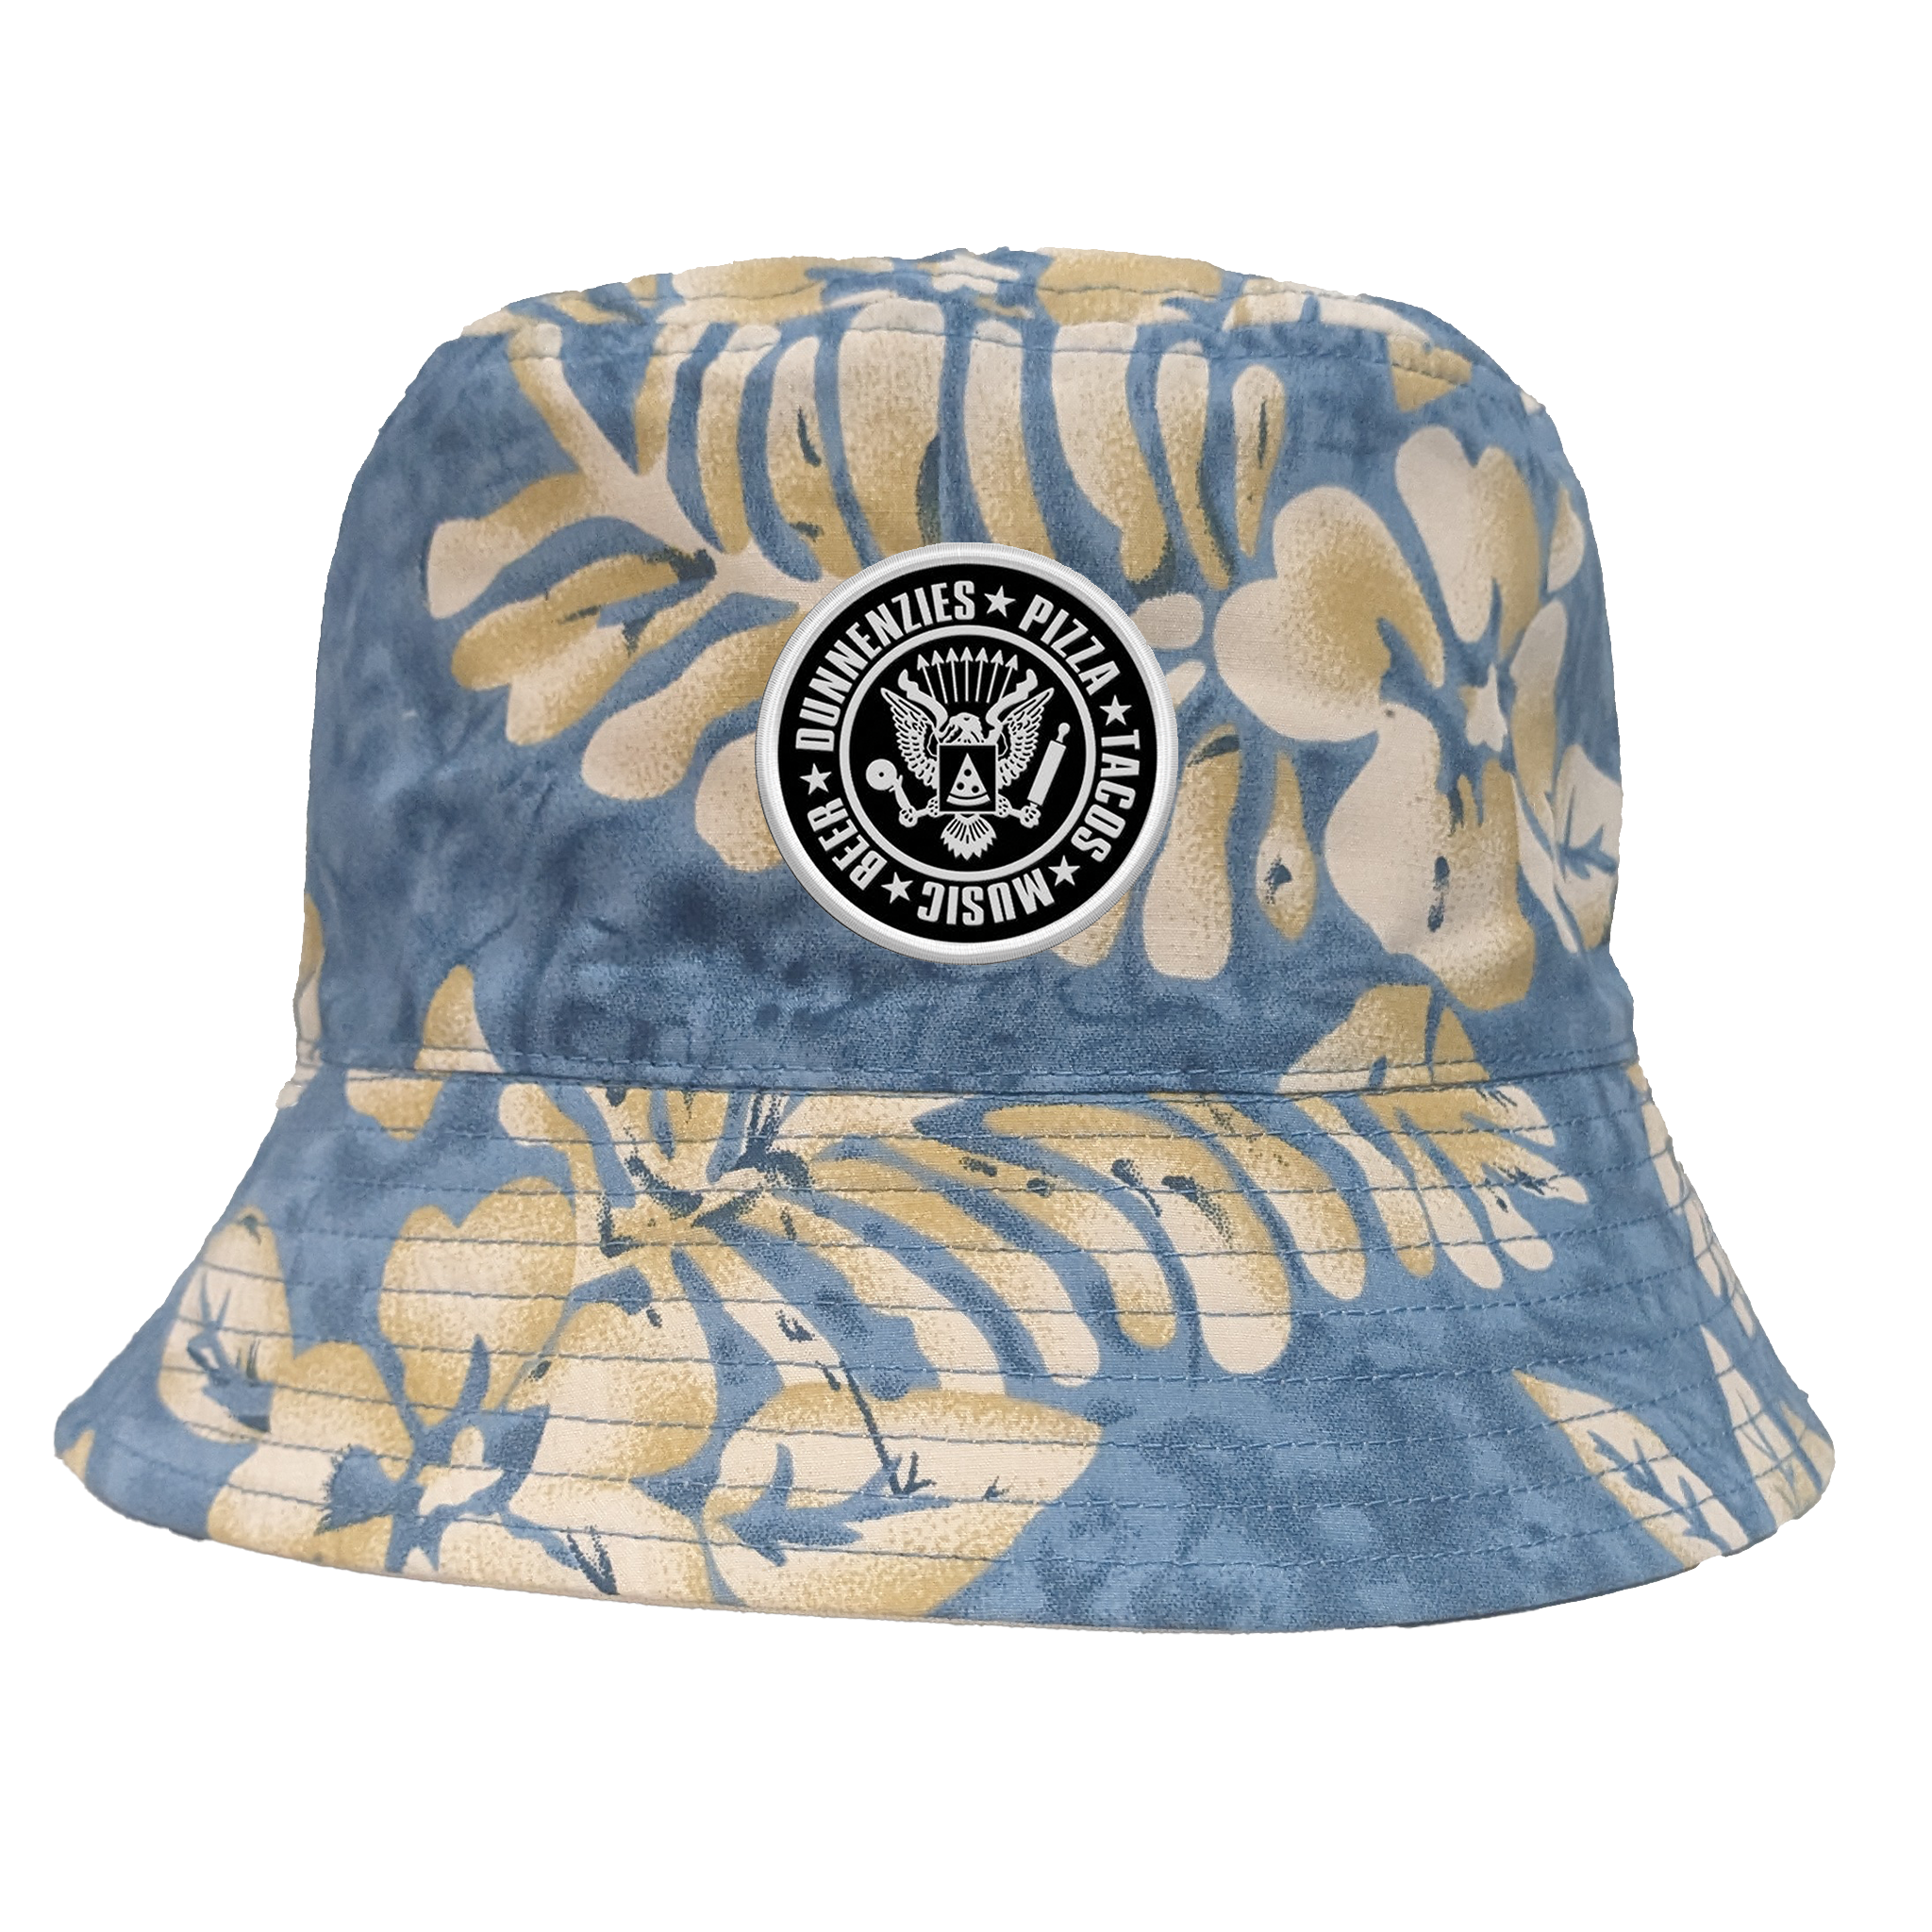 Dunnenzies Bucket Hat - Adult Unisex One Size Fits All - Floral Reversible